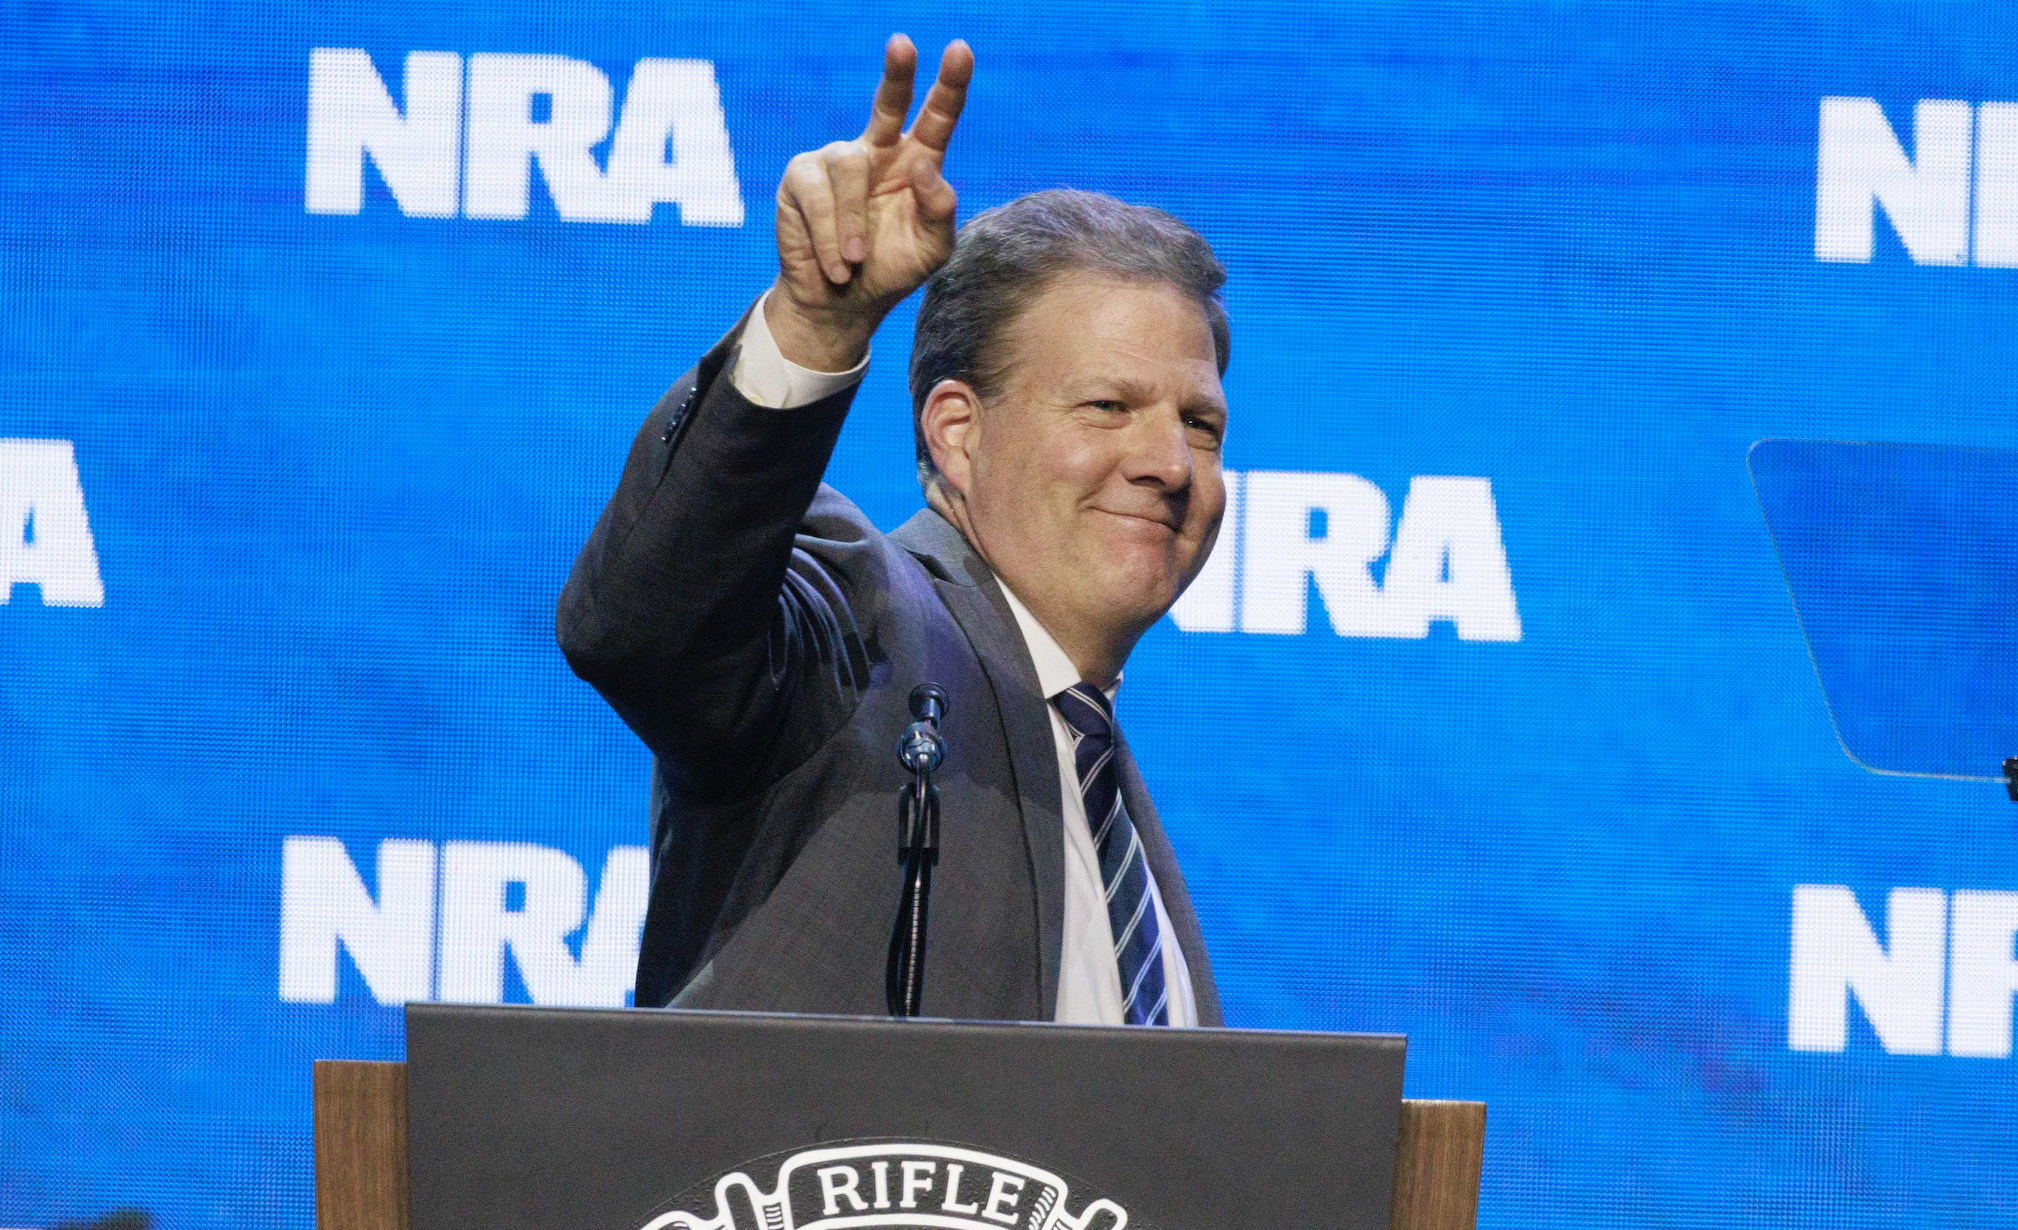 Governor Sununu stands up for Second Amendment on NBC: Proves Gun Control is Ineffective.